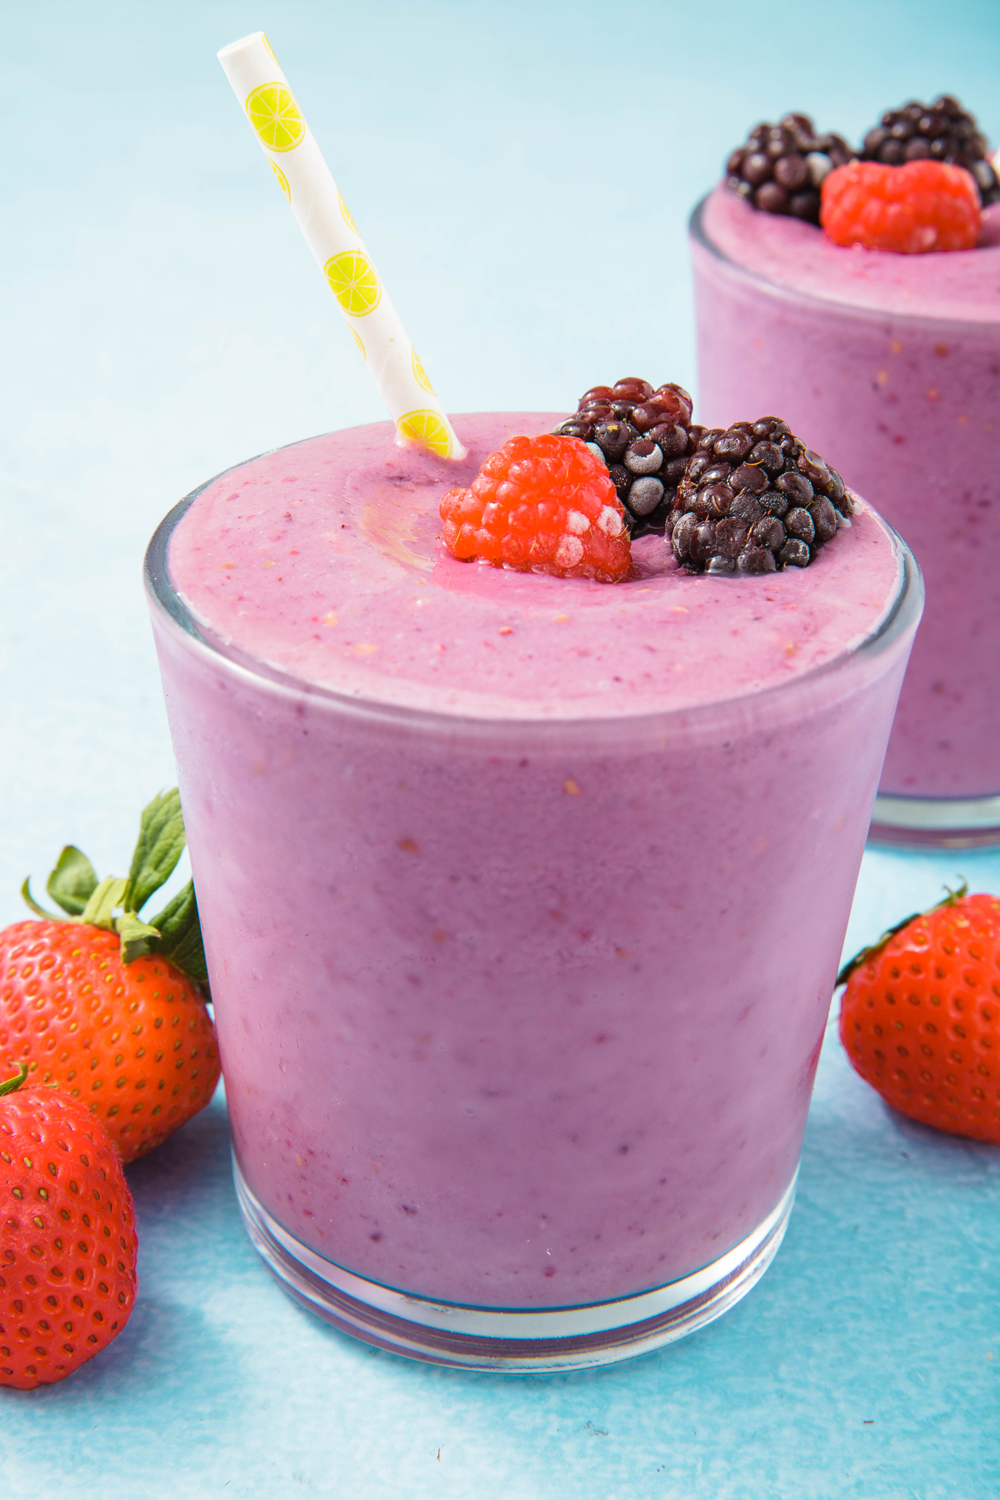 40 Best Healthy Smoothie Recipes - How to Make Healthy Smoothies